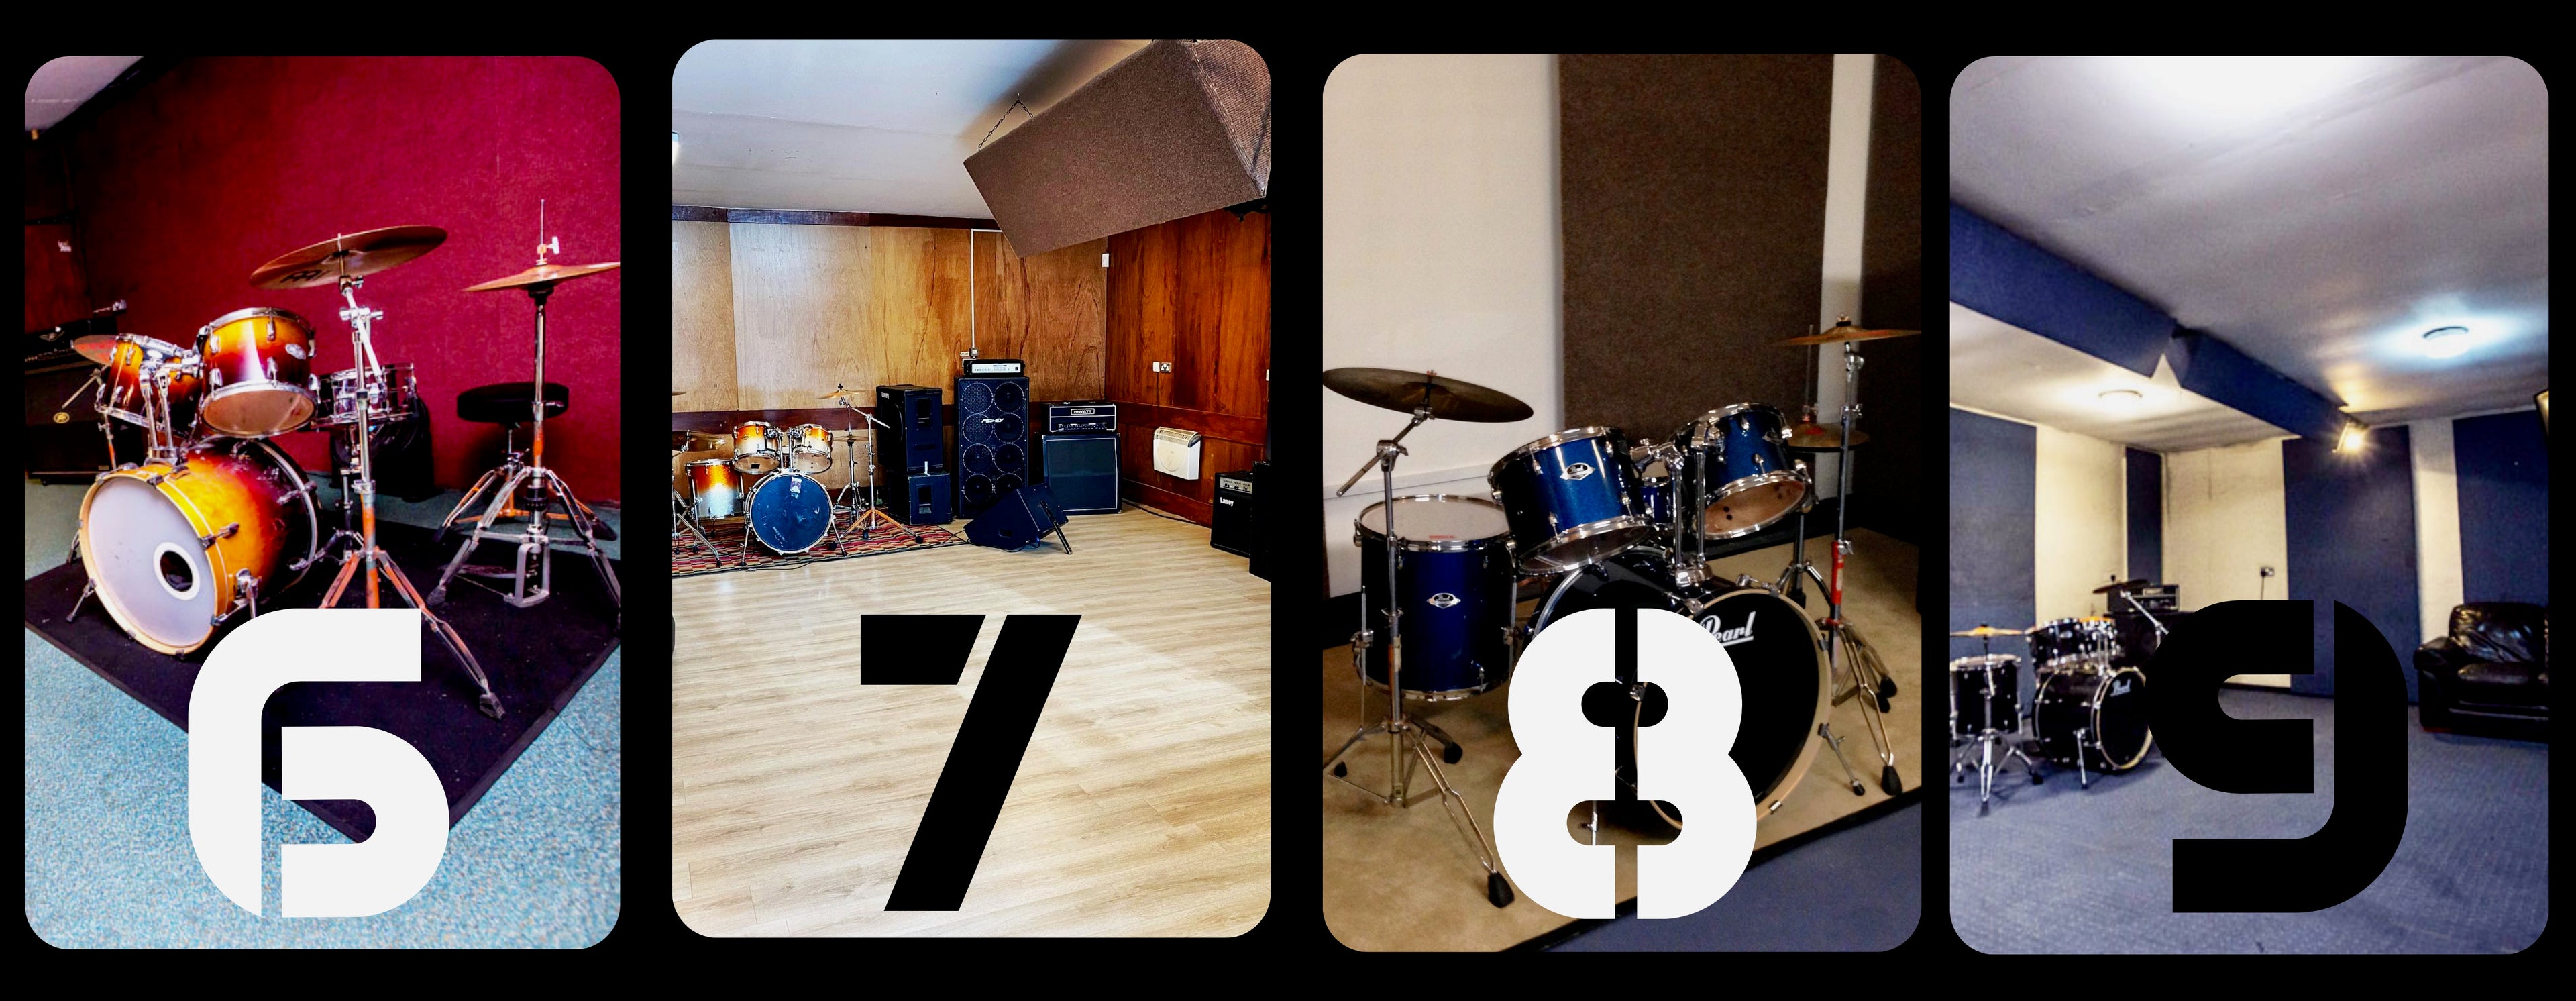 Rehearsal studios 6 7 8 and 9 with drums and amps